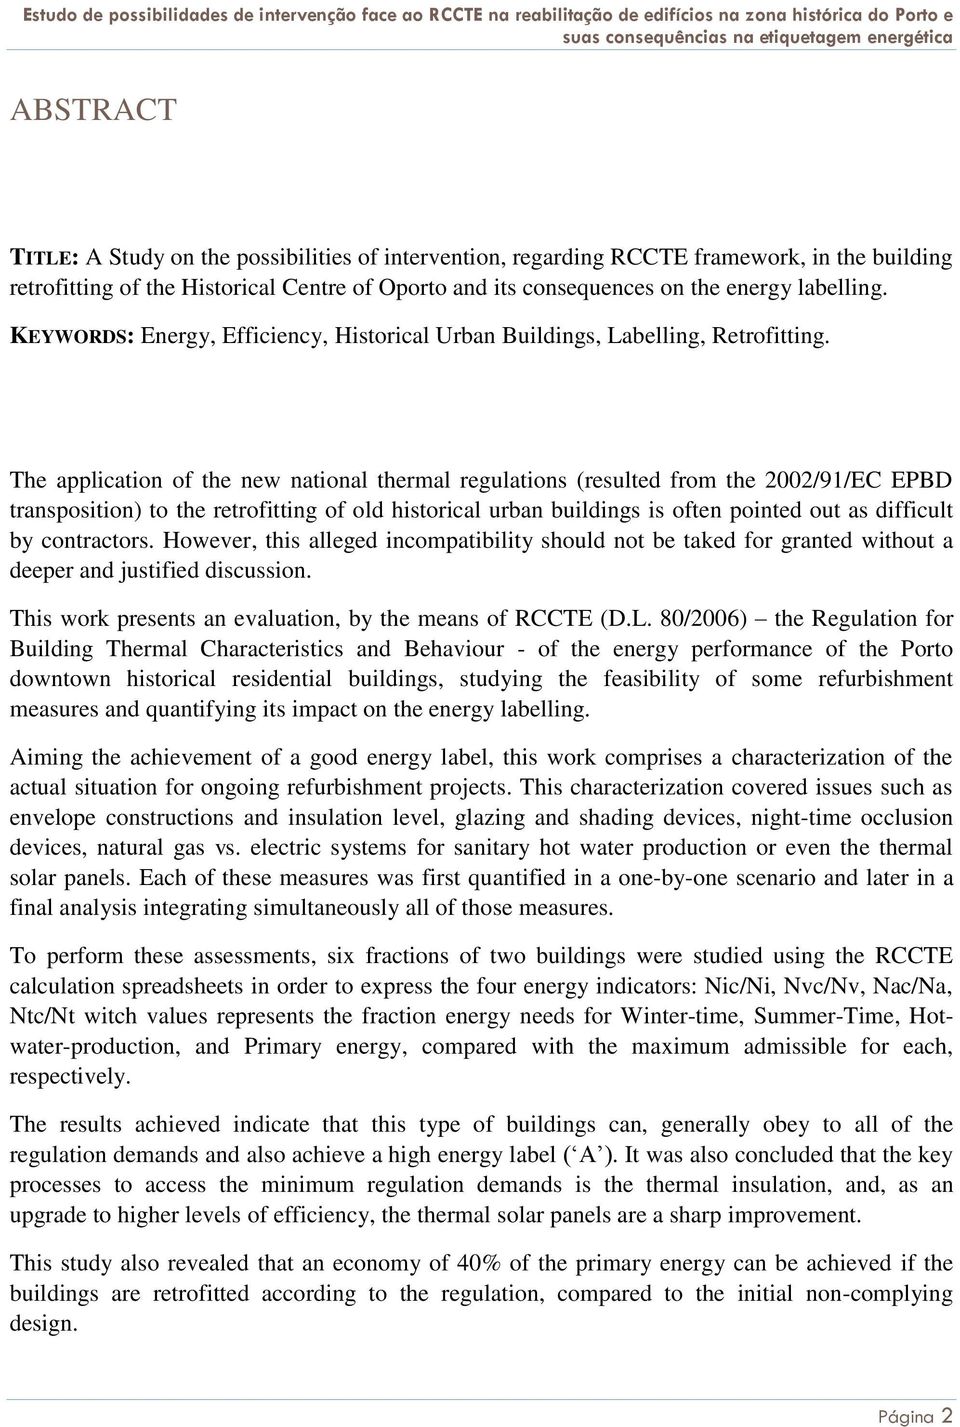 The application of the new national thermal regulations (resulted from the 2002/91/EC EPBD transposition) to the retrofitting of old historical urban buildings is often pointed out as difficult by